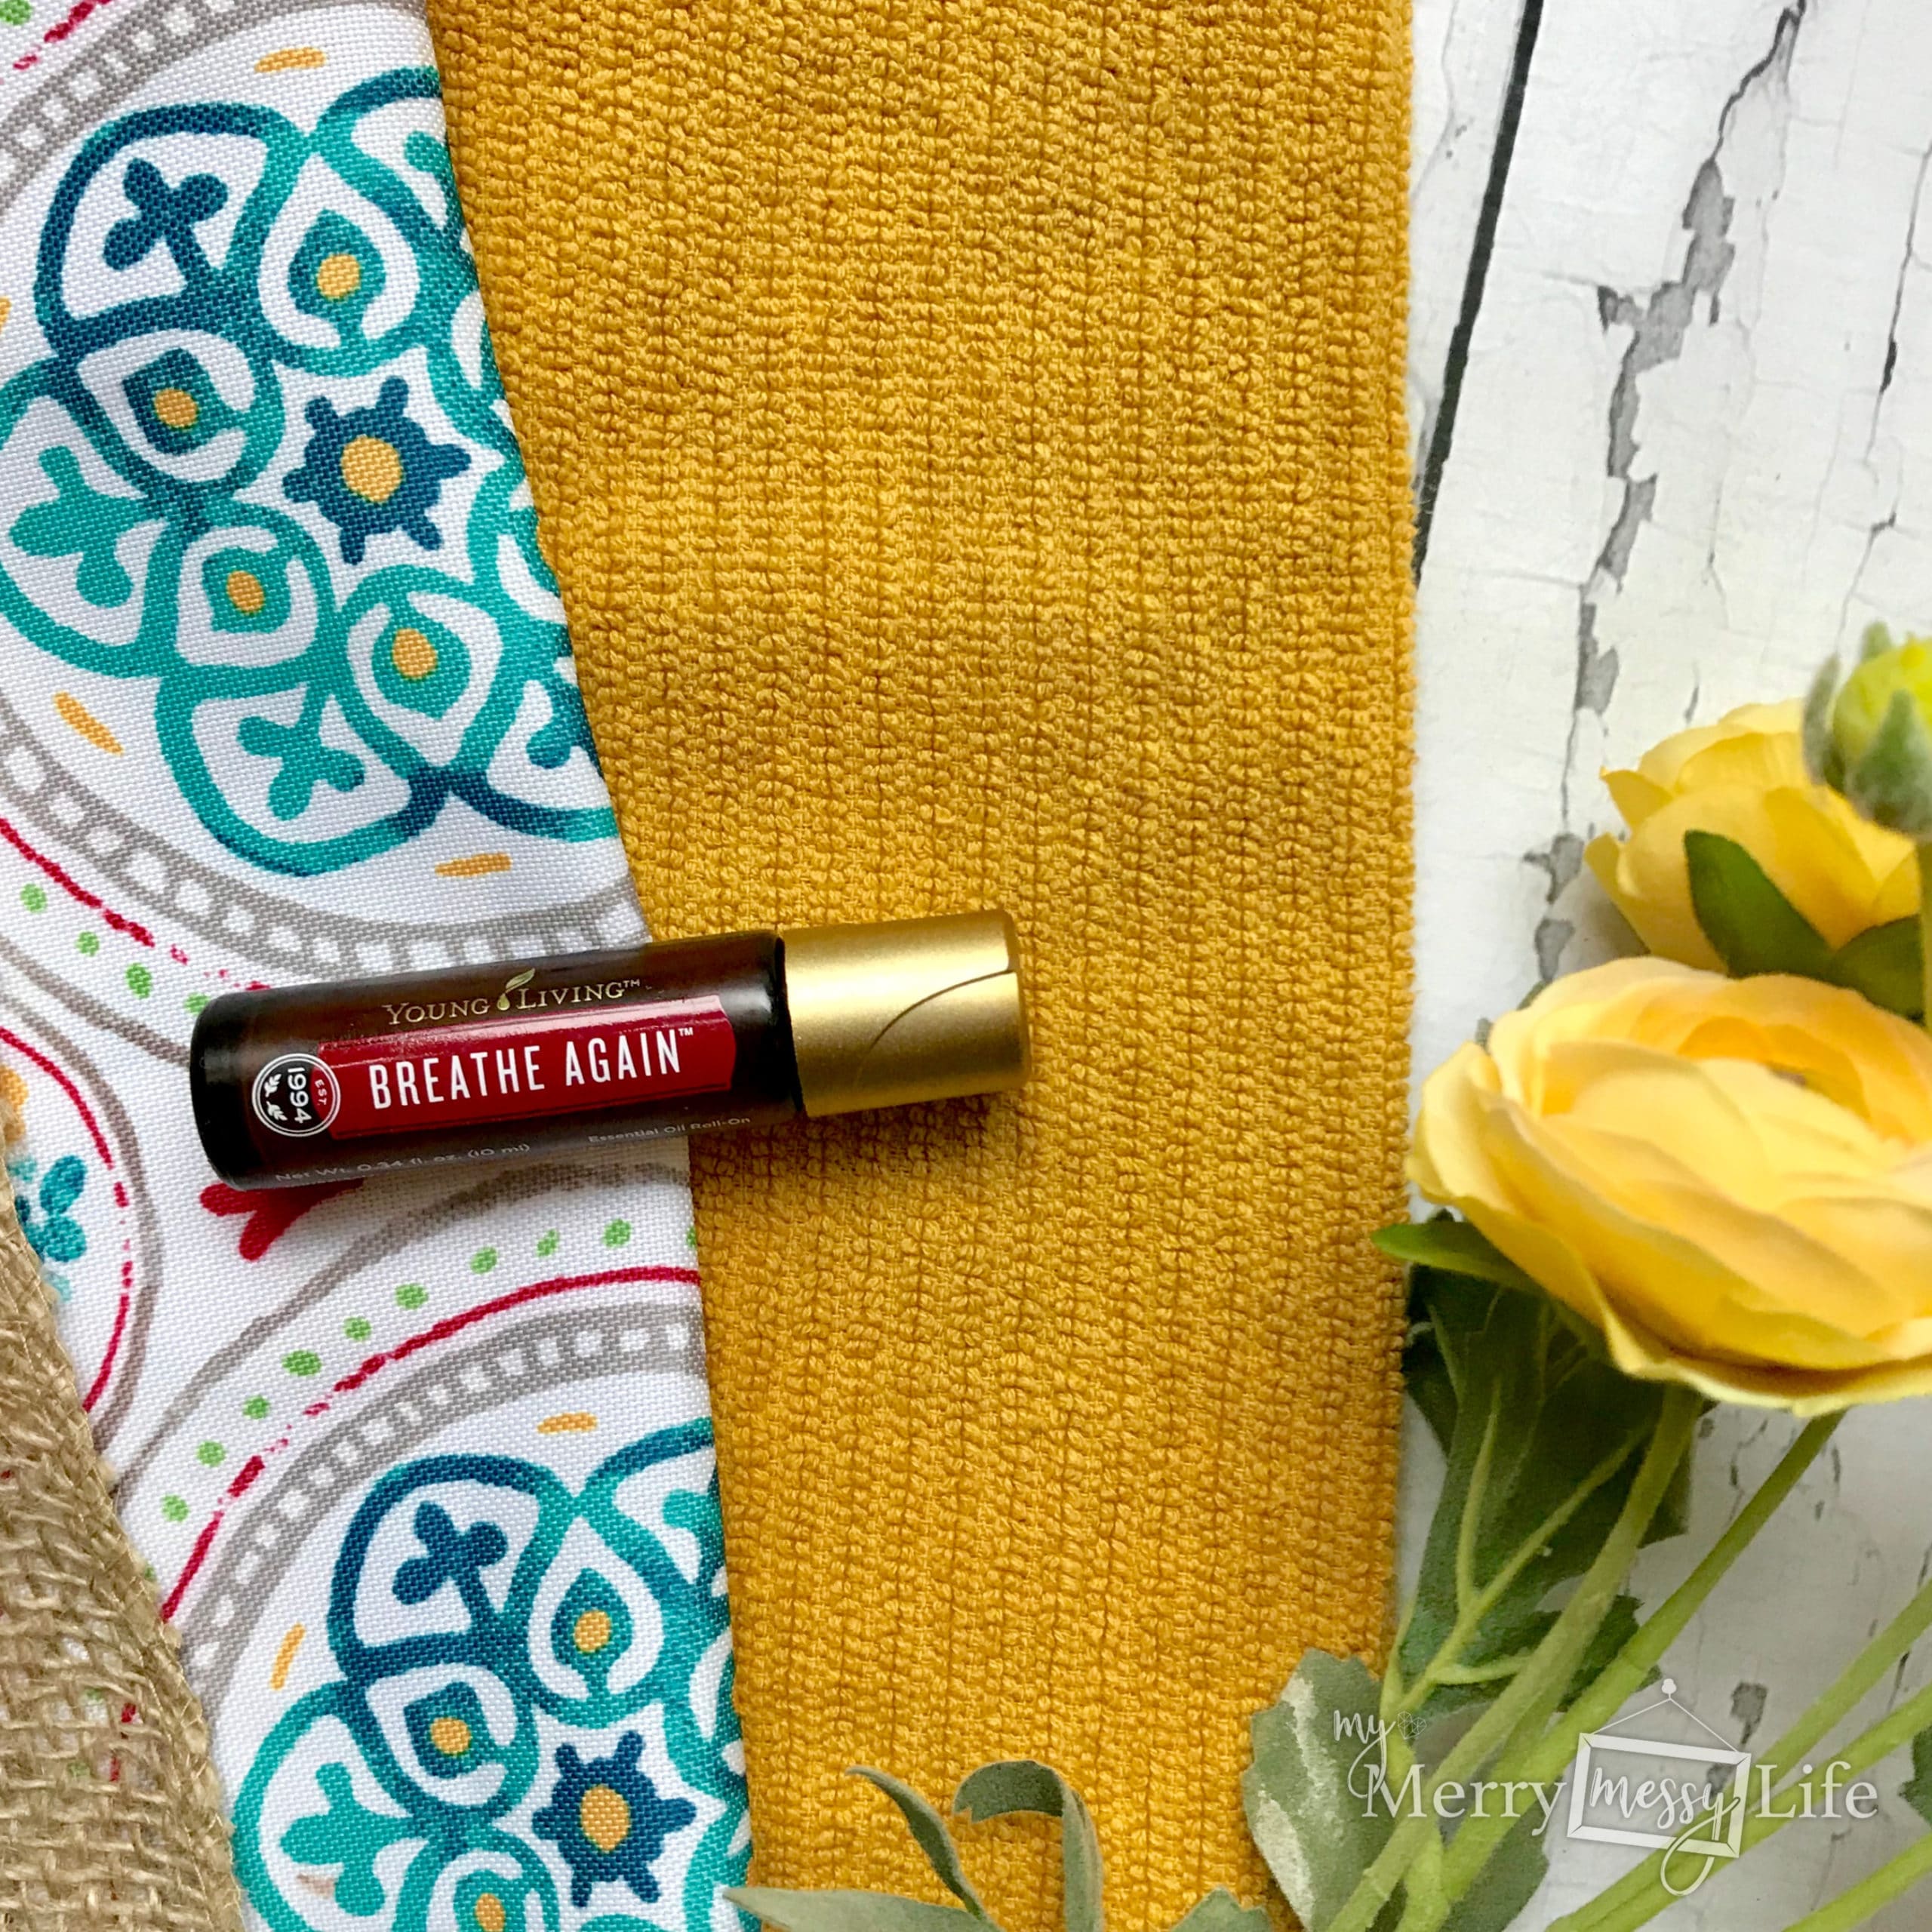 Breathe Again Roll On from Young Living Essential Oils 